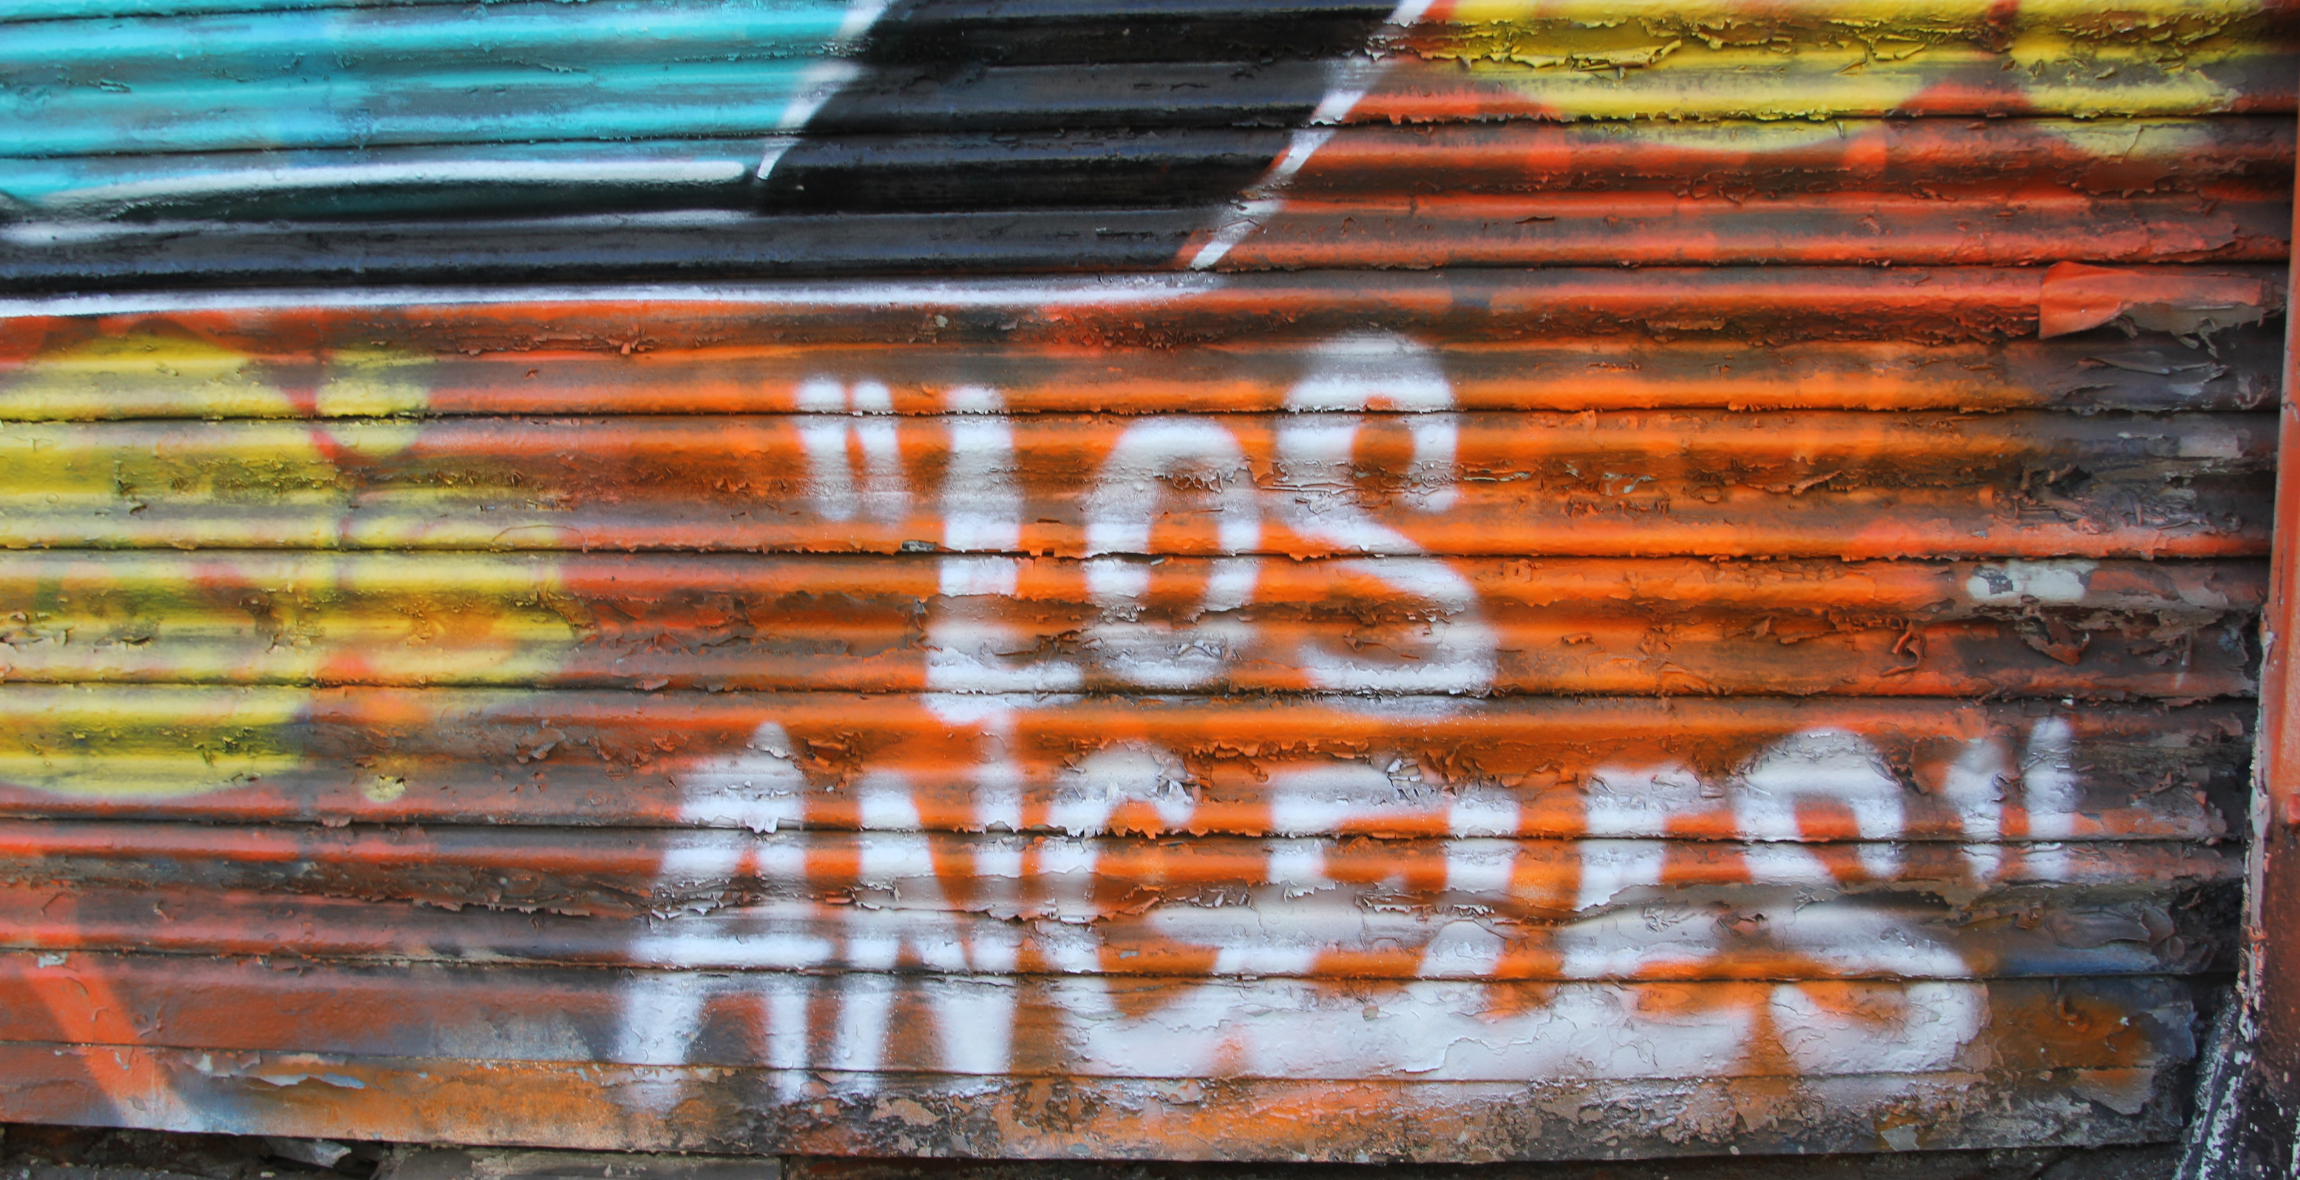 Graffiti "Los Angeles" on a rustic and painted surface 